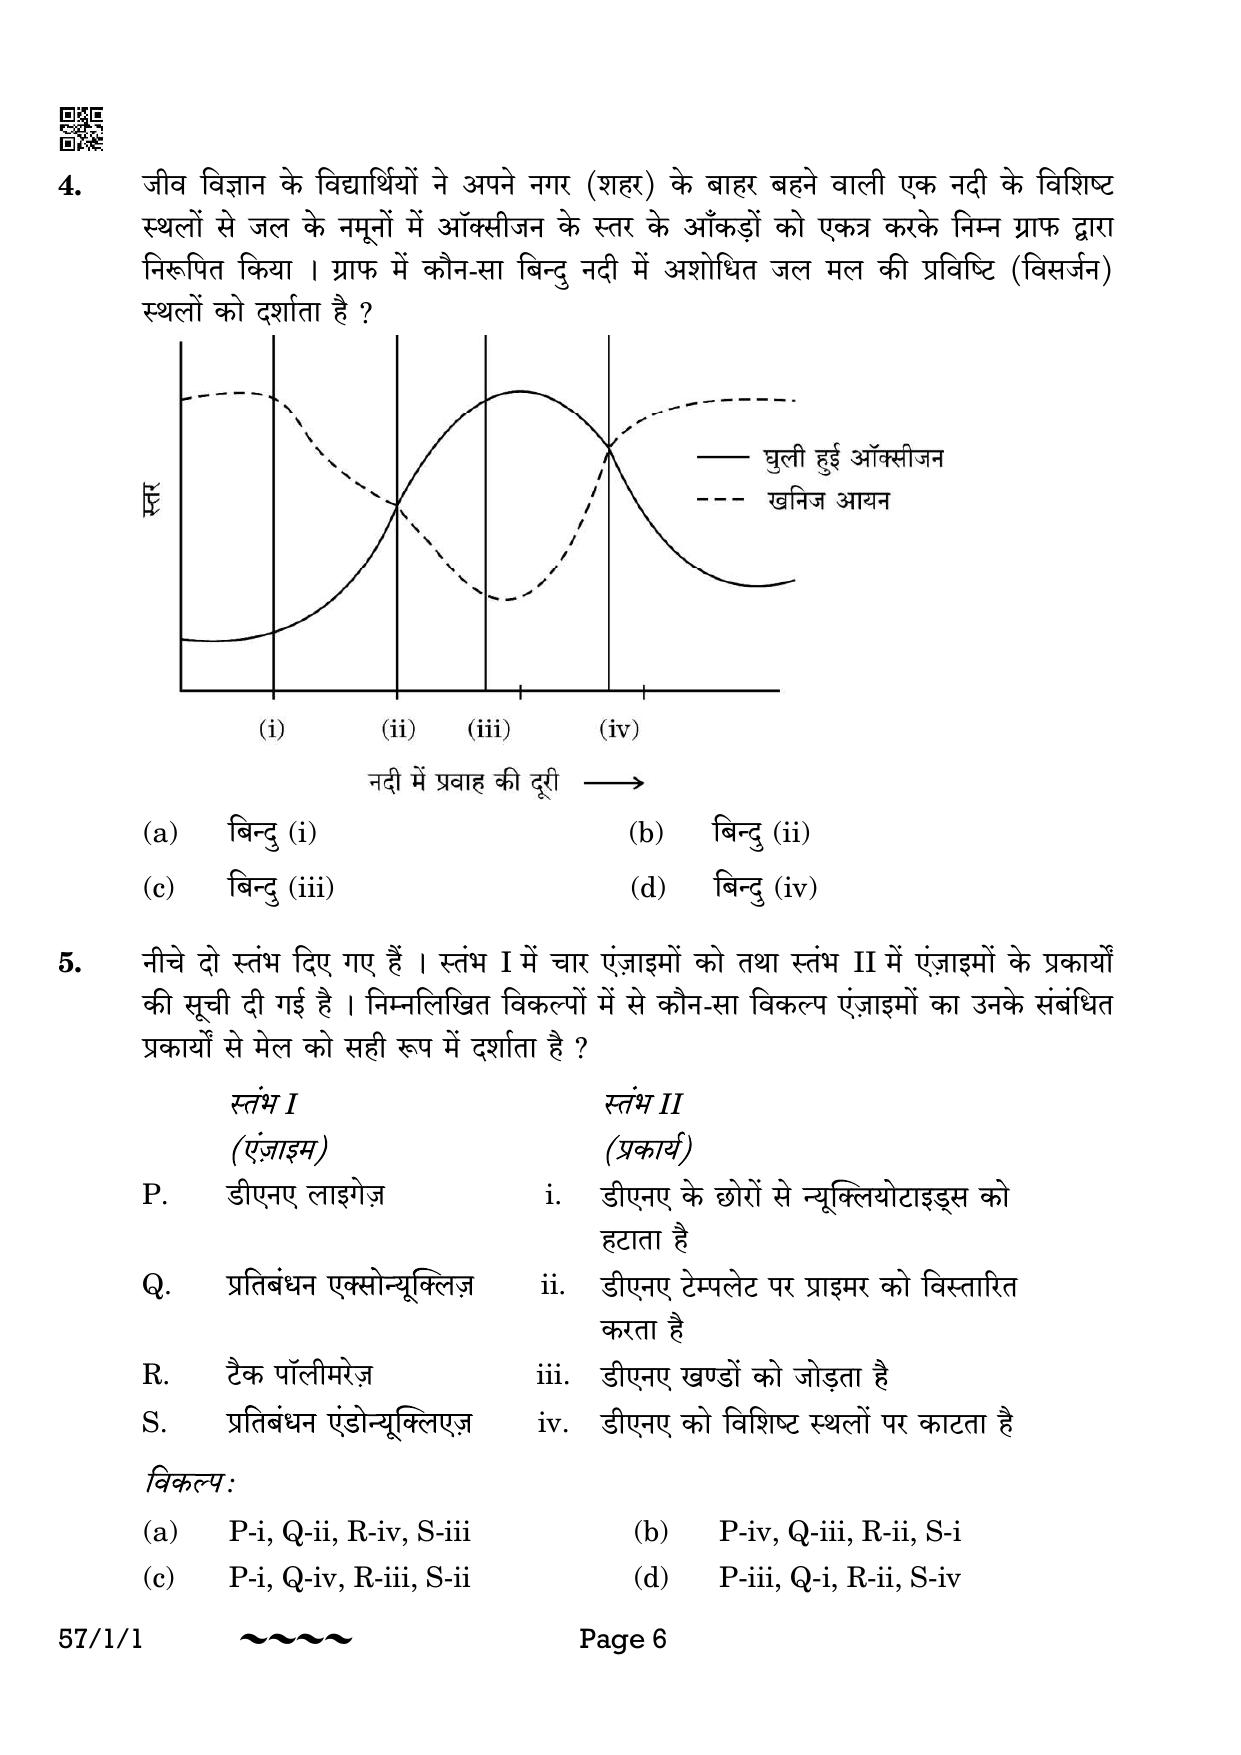 CBSE Class 12 57-1-1 Biology 2023 Question Paper - Page 6